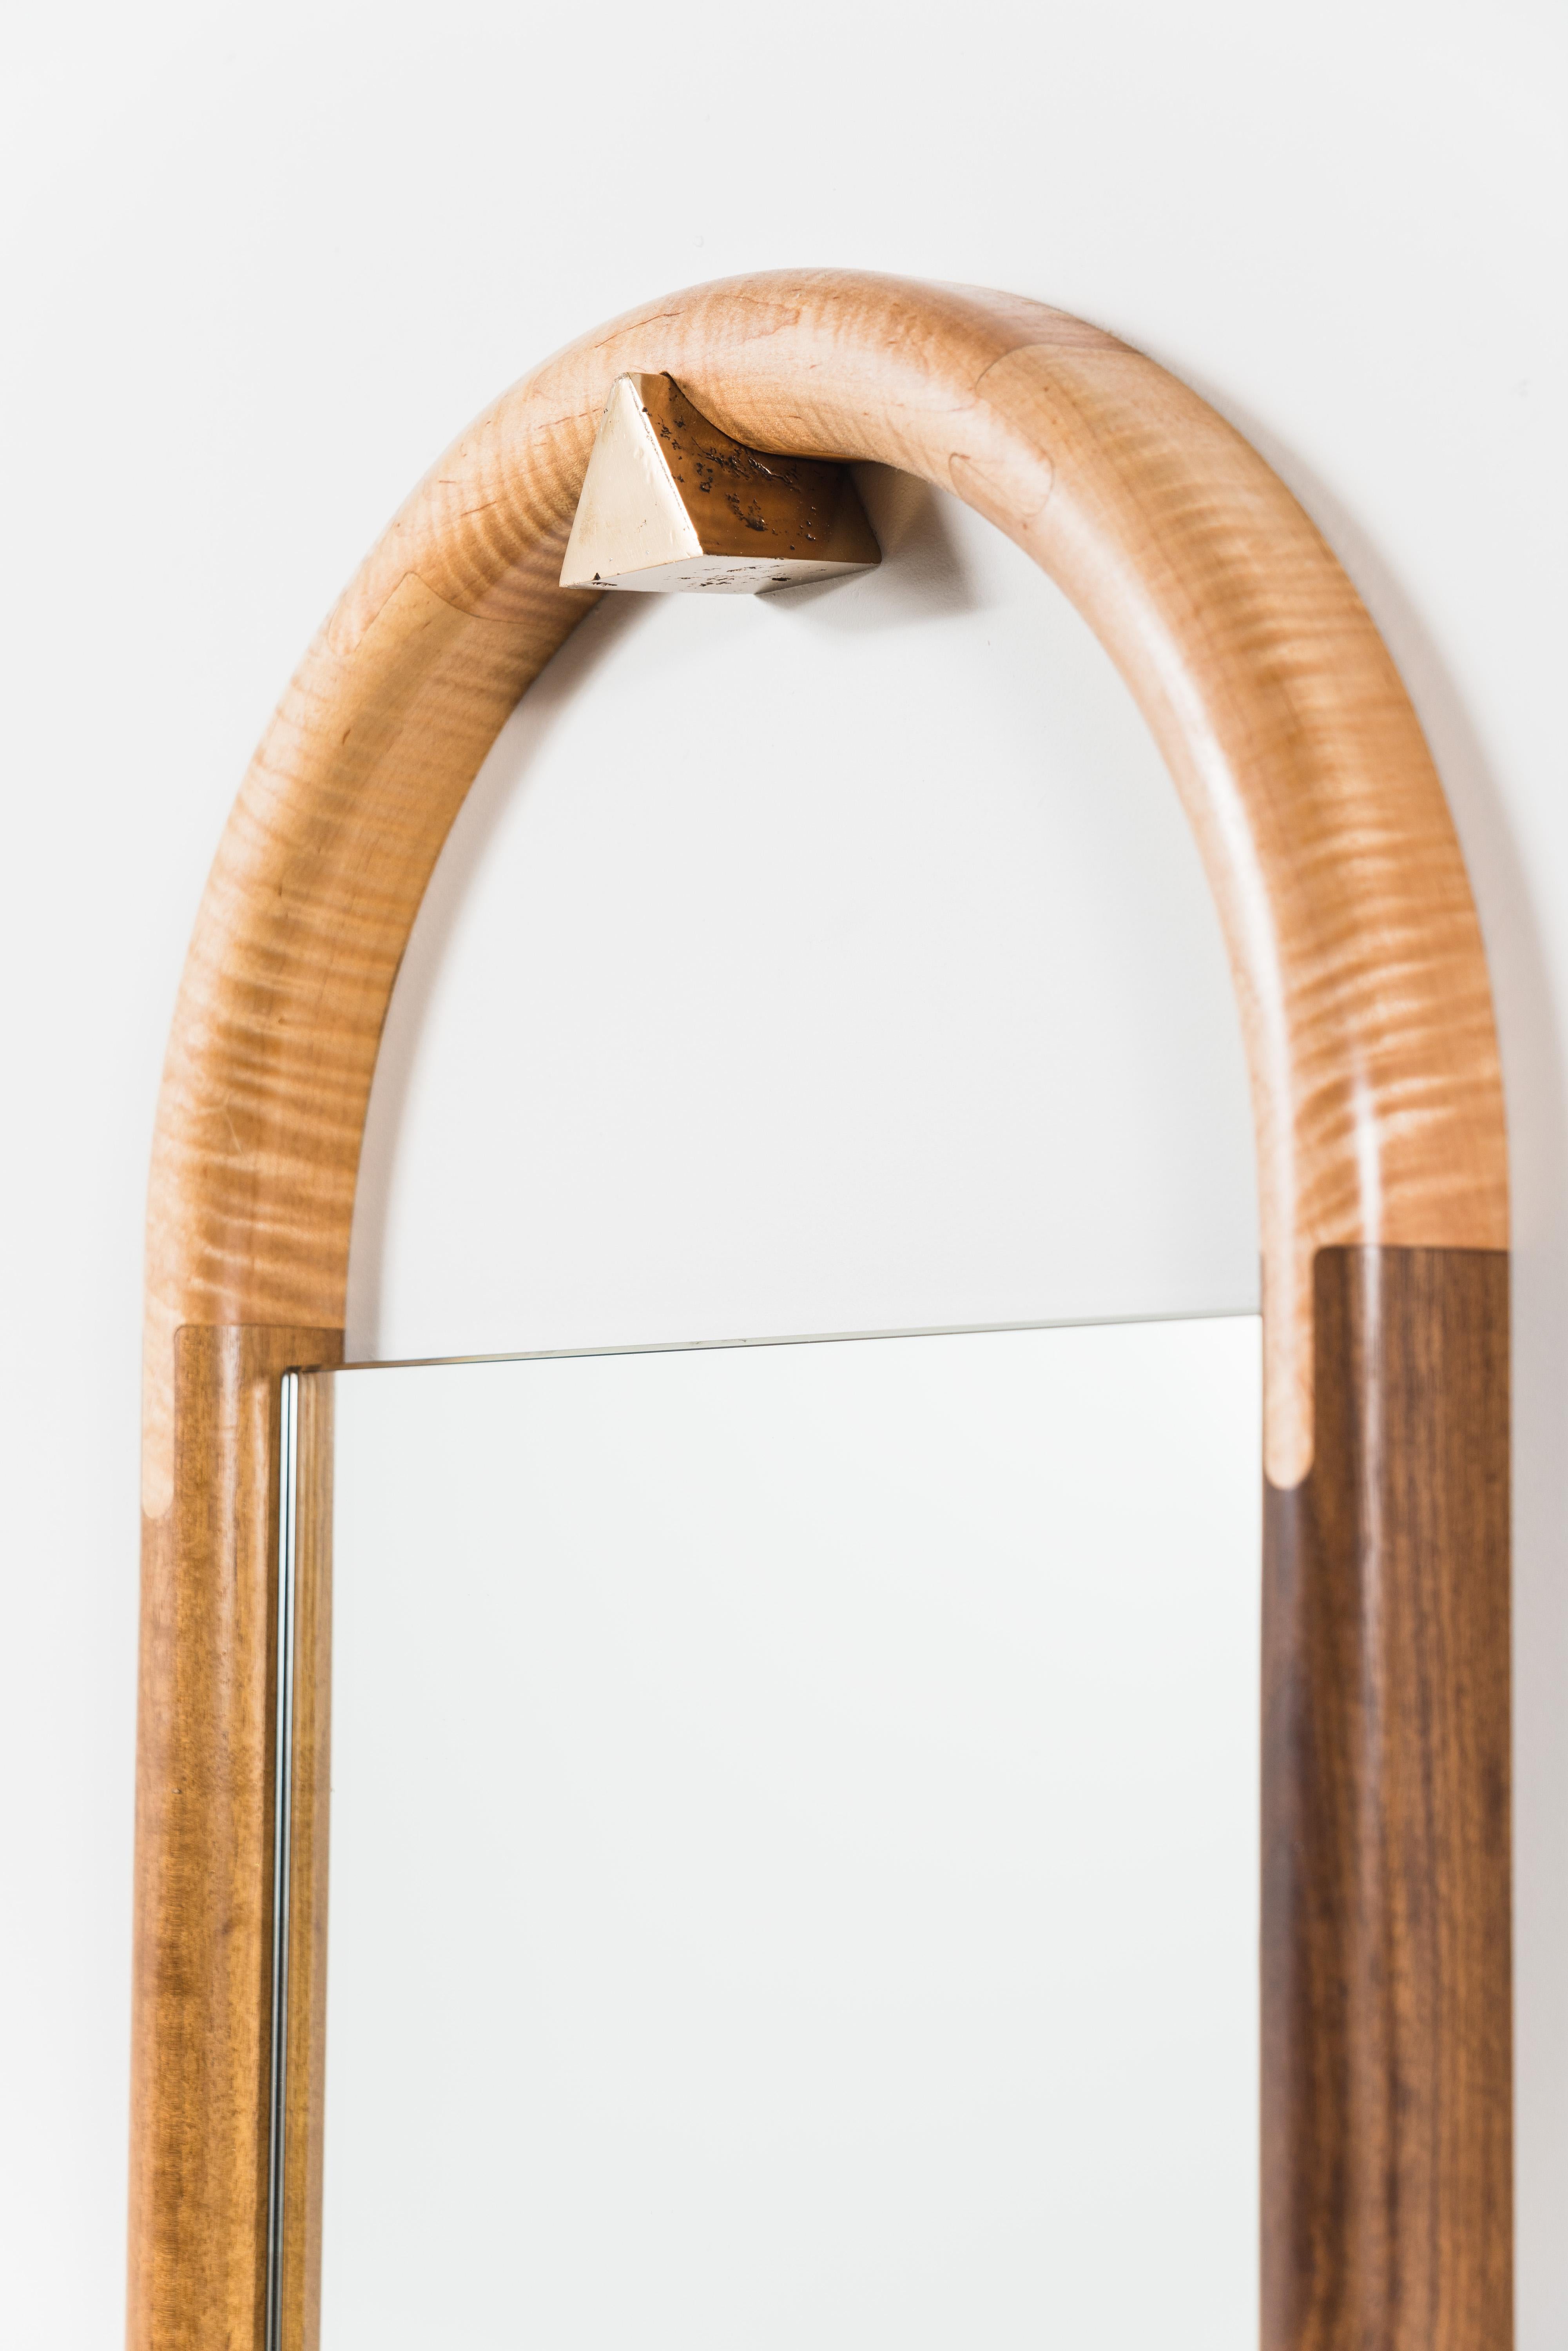 Please note: This listing is for the wood species shown in the first three images and named in the title. All other variations pictured are also available by request or in other listings. 

The Tall Halo mirror both hangs and self-levels on a